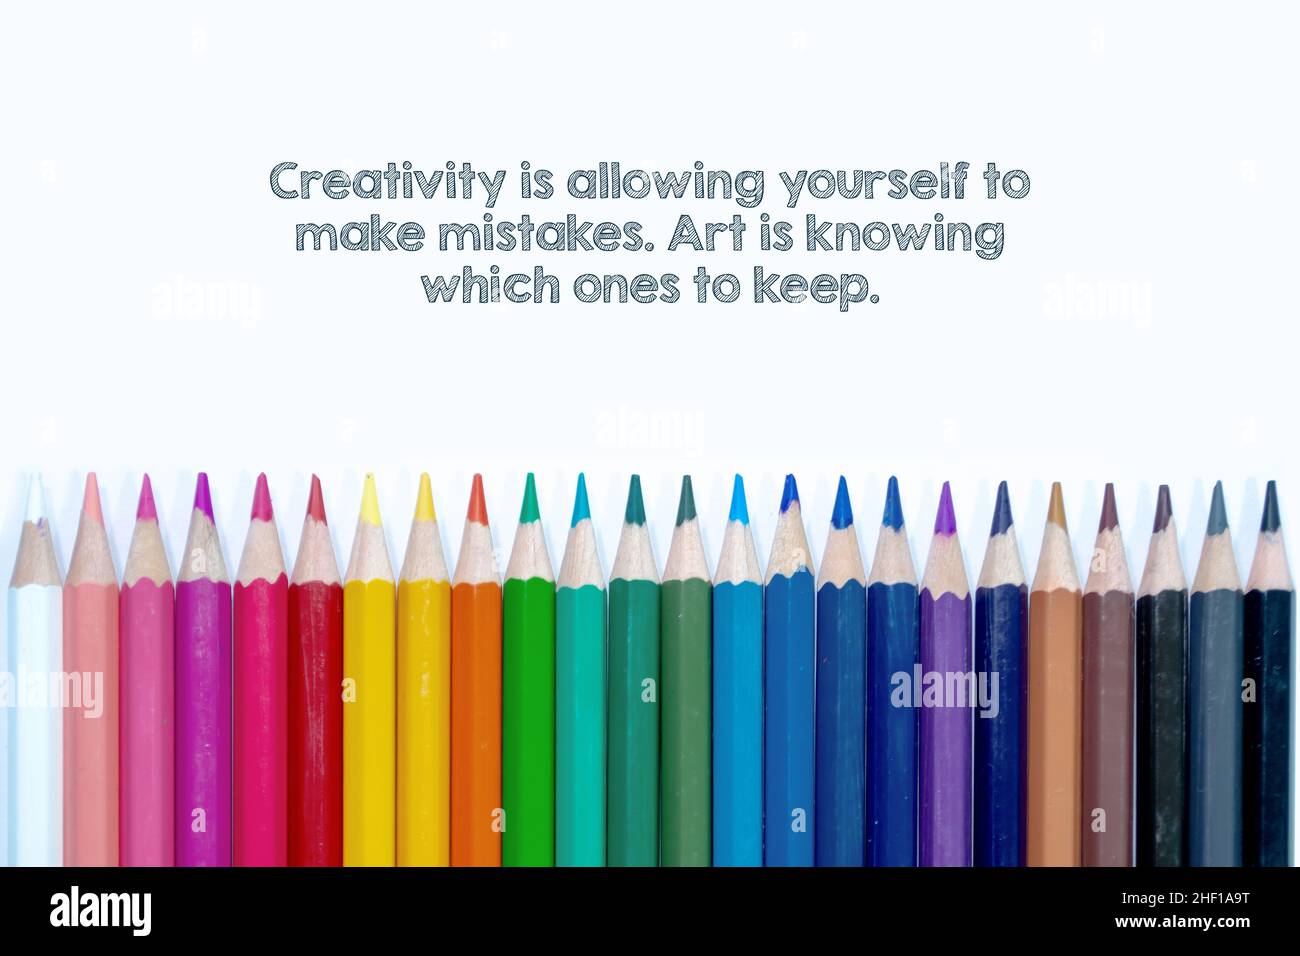 Creativity Is Allowing Yourself to Make Mistakes. Art Is Knowing Which Ones to Keep text on white background with color pencil Stock Photo